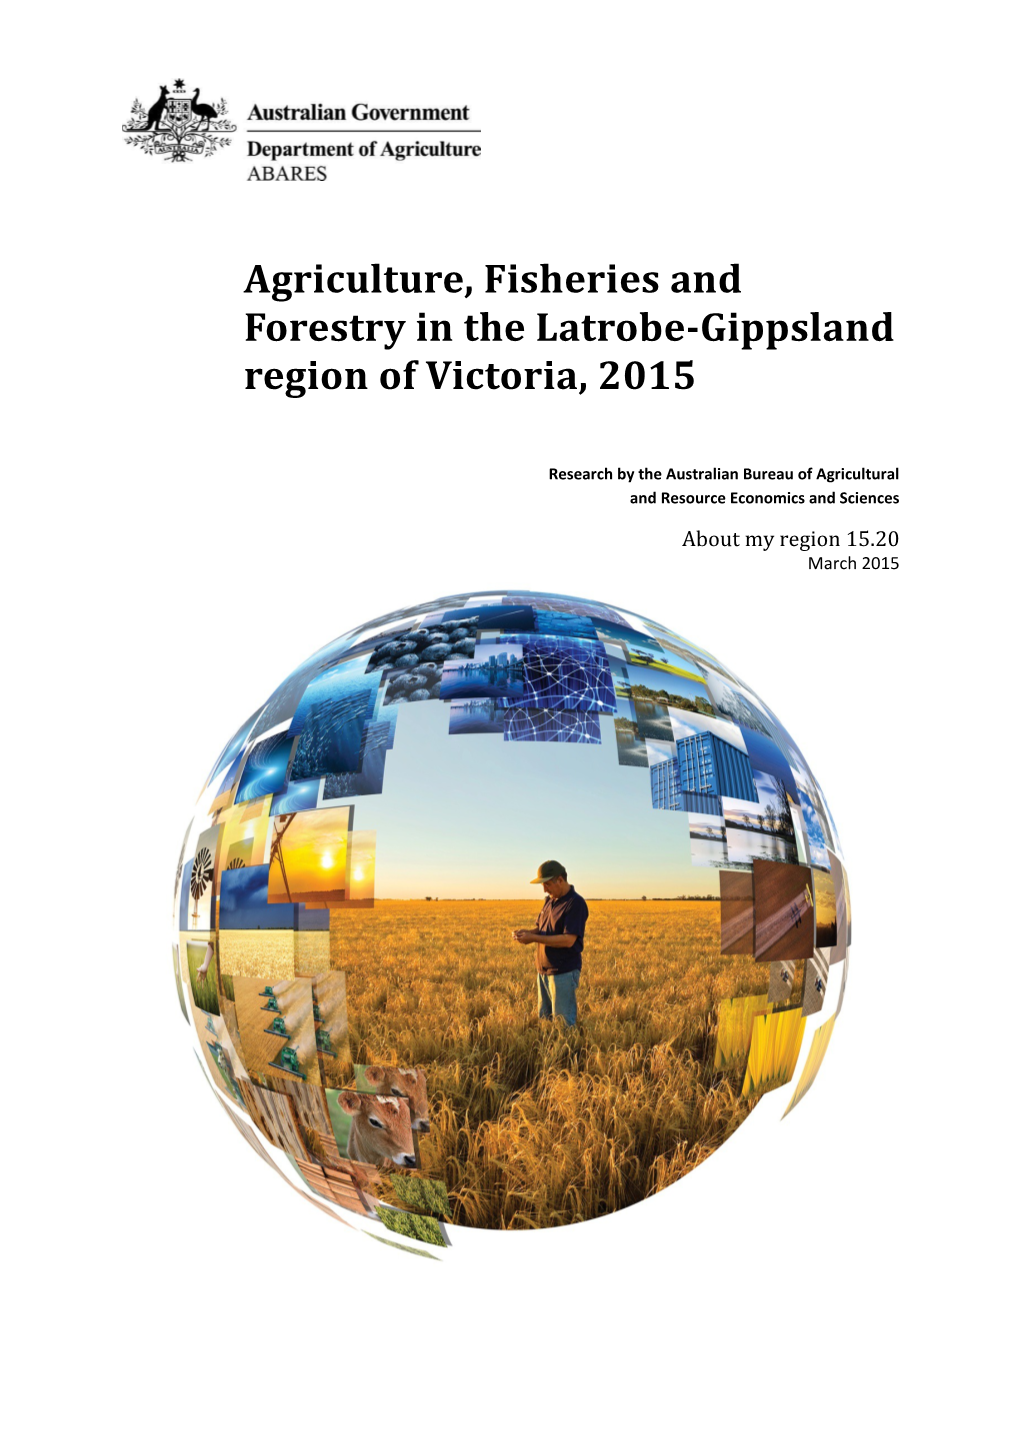 Agriculture, Fisheries and Forestry in the Latrobe-Gippsland Region of Victoria, 2015